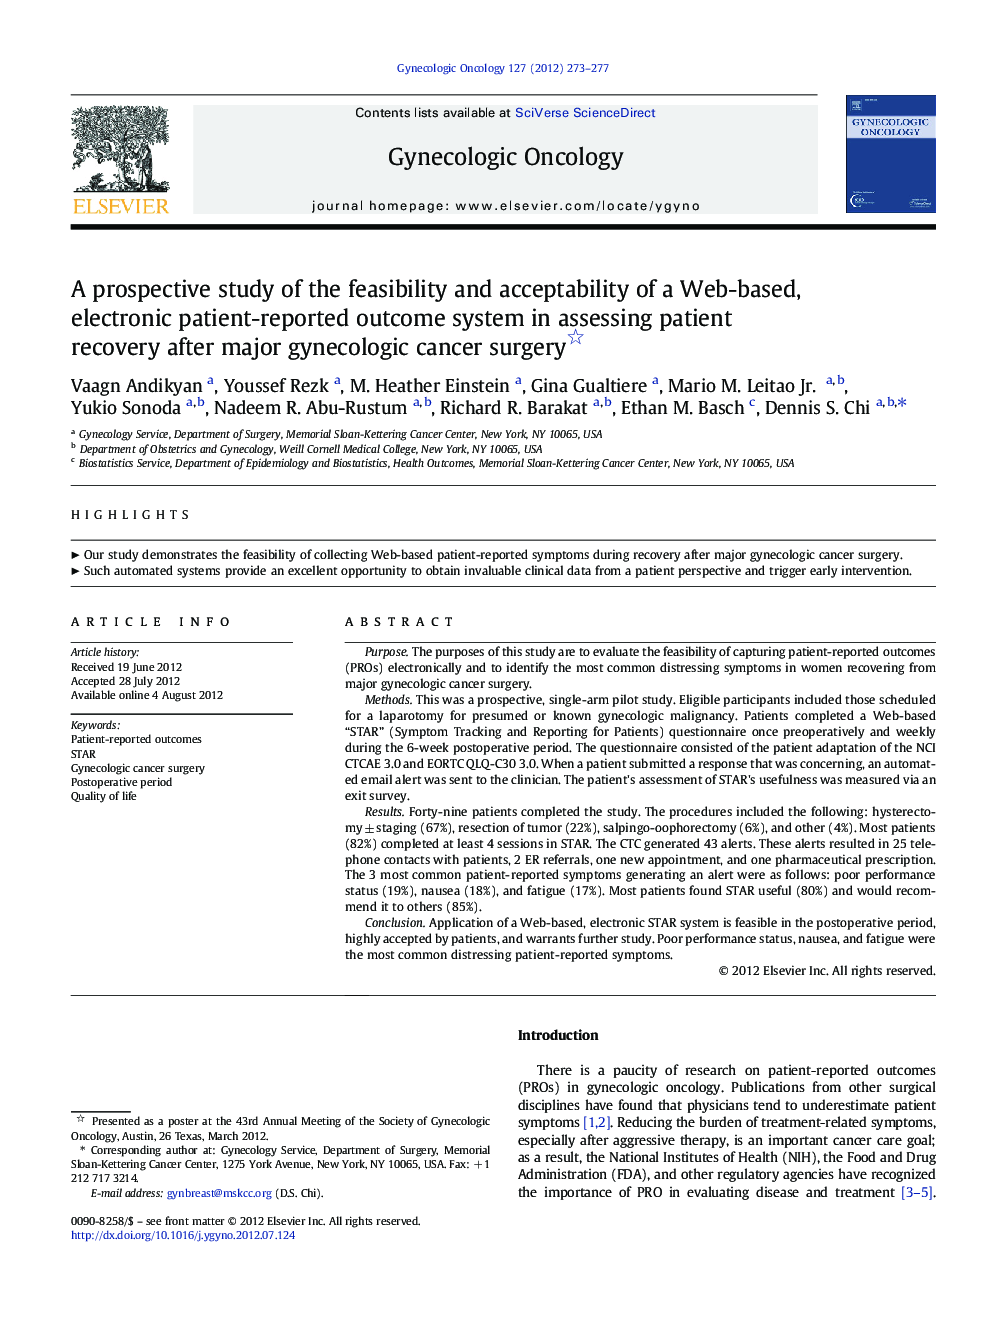 A prospective study of the feasibility and acceptability of a Web-based, electronic patient-reported outcome system in assessing patient recovery after major gynecologic cancer surgery 